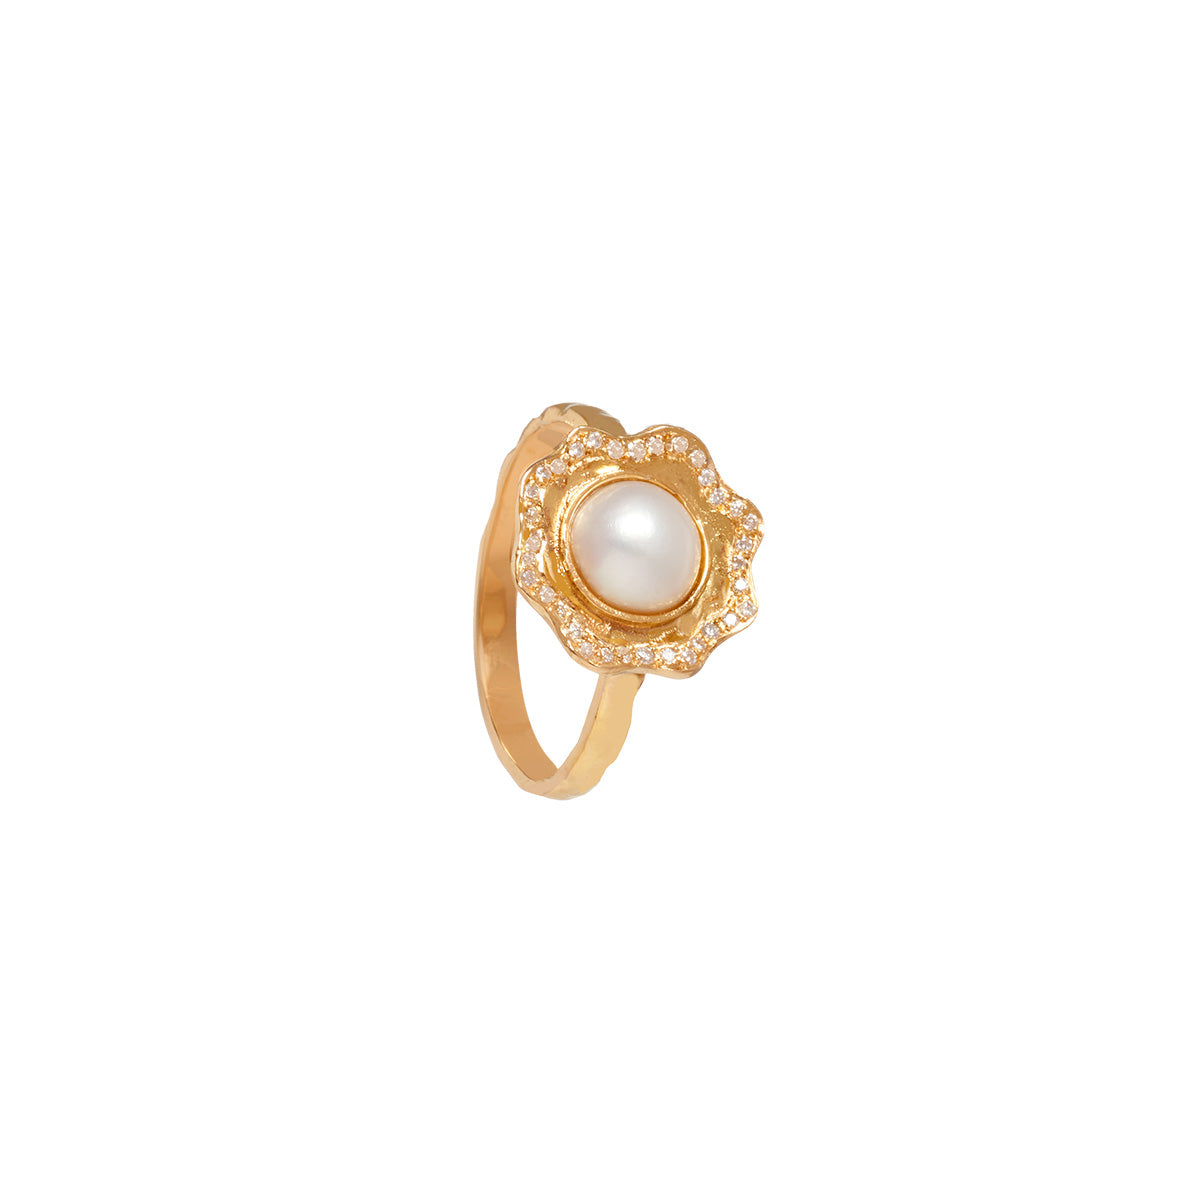 Ring with Diamonds and one Pearl